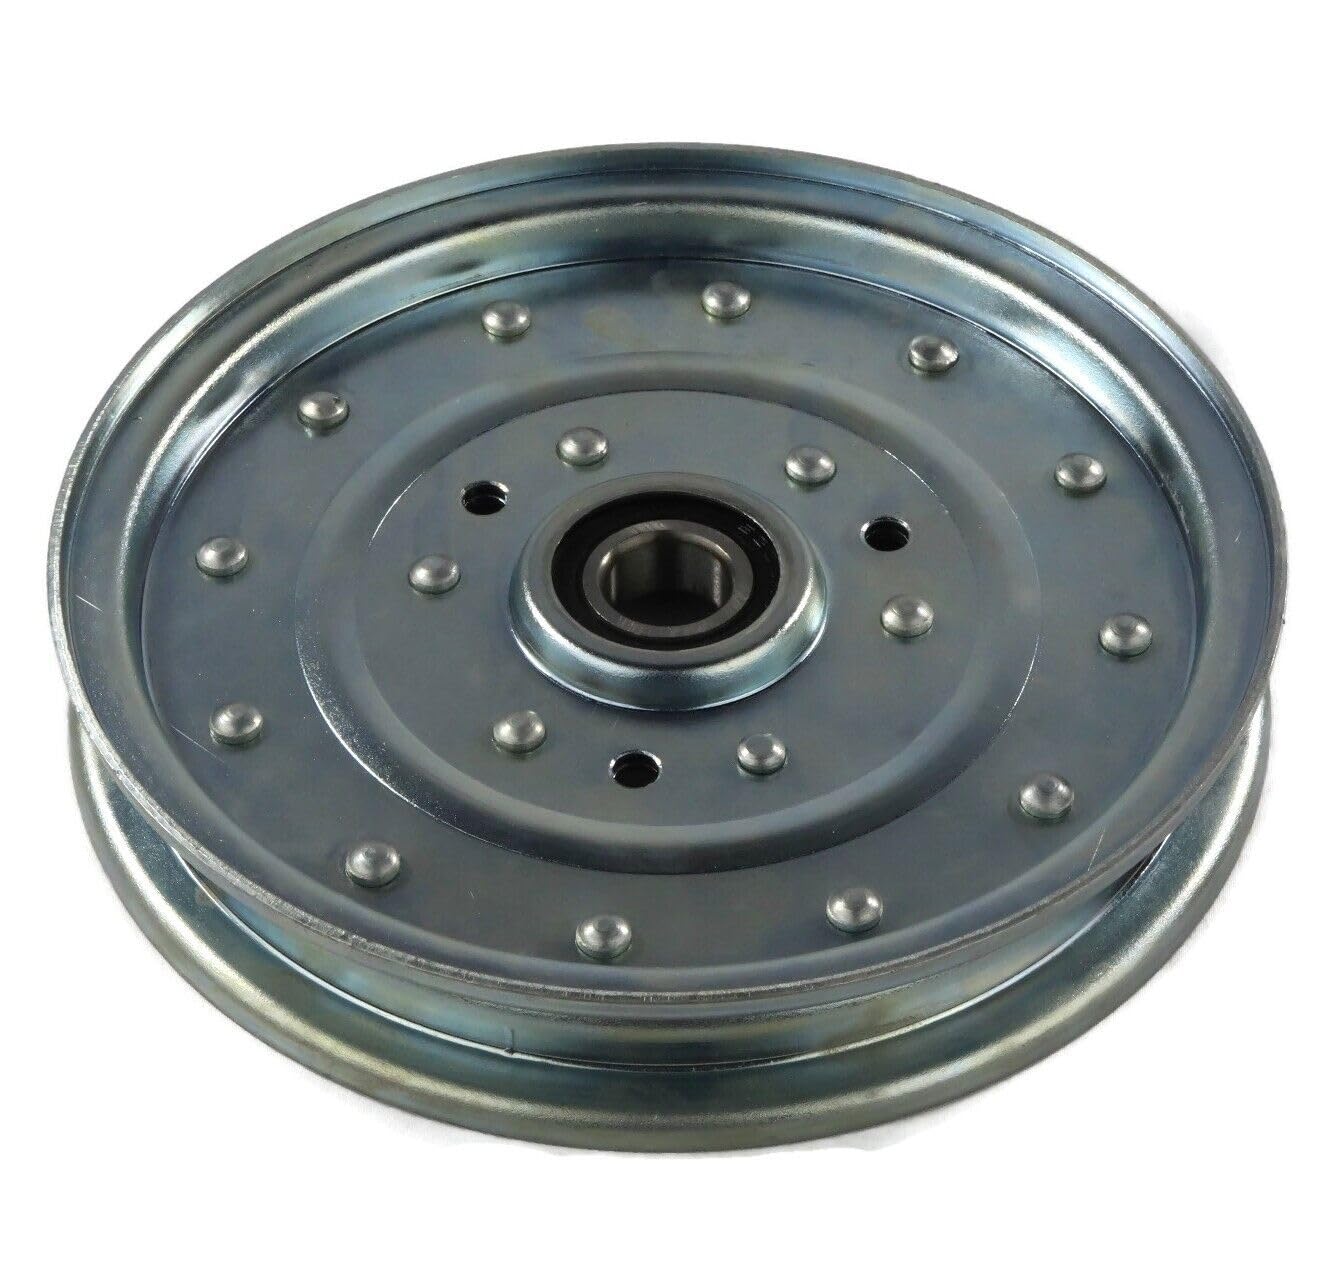 The ROP Shop Flat Idler Pulley for 2008 Toro Z Master Z450-74417 with 48" Deck Lawn Mowers